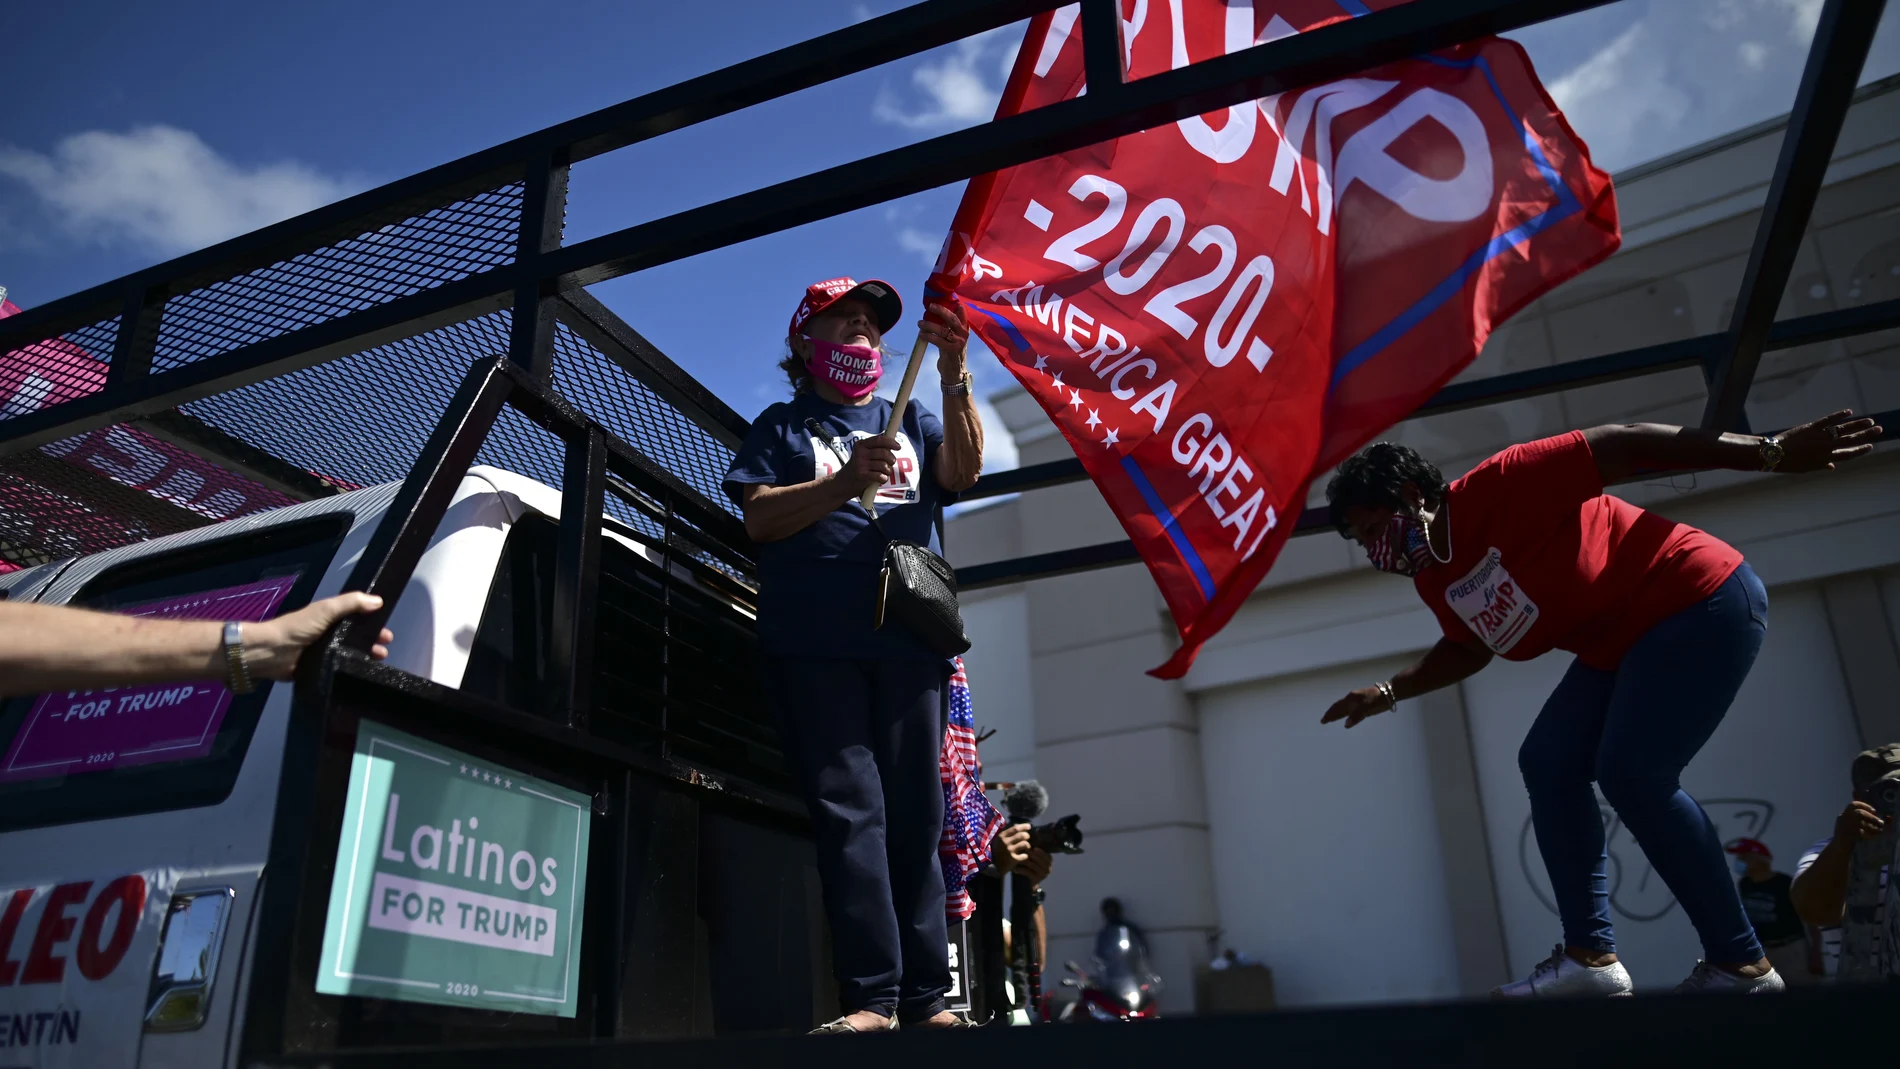 Former senator Miriam RamÃ­rez de Ferrer carries a pro-Trump flag moments before leaving for the headquarters of the Republican party in support of President Donald Trump's candidacy a few weeks before the presidential election next November, in Carolina, Puerto Rico, Sunday, Oct. 18, 2020. President Donald Trump and former Vice President Joe Biden are targeting Puerto Rico in a way never seen before to gather the attention of tens of thousands of potential voters in the battleground state of Florida. (AP Photo/Carlos Giusti)